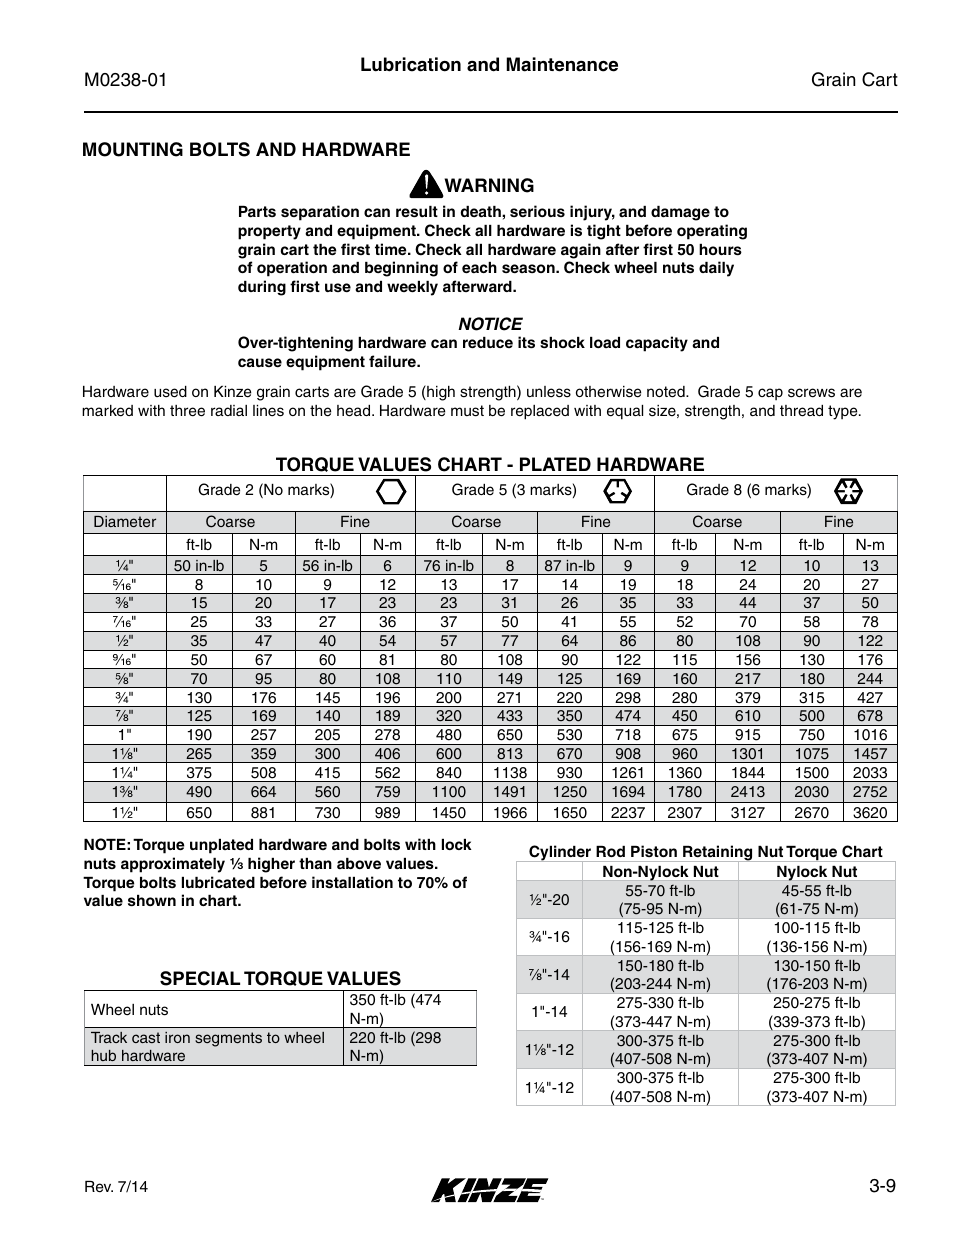 Mounting bolts and hardware, Torque values chart - plated hardware, Mounting bolts and hardware -9 | Torque values chart - plated hardware -9 | Kinze Grain Carts Rev. 7/14 User Manual | Page 45 / 70